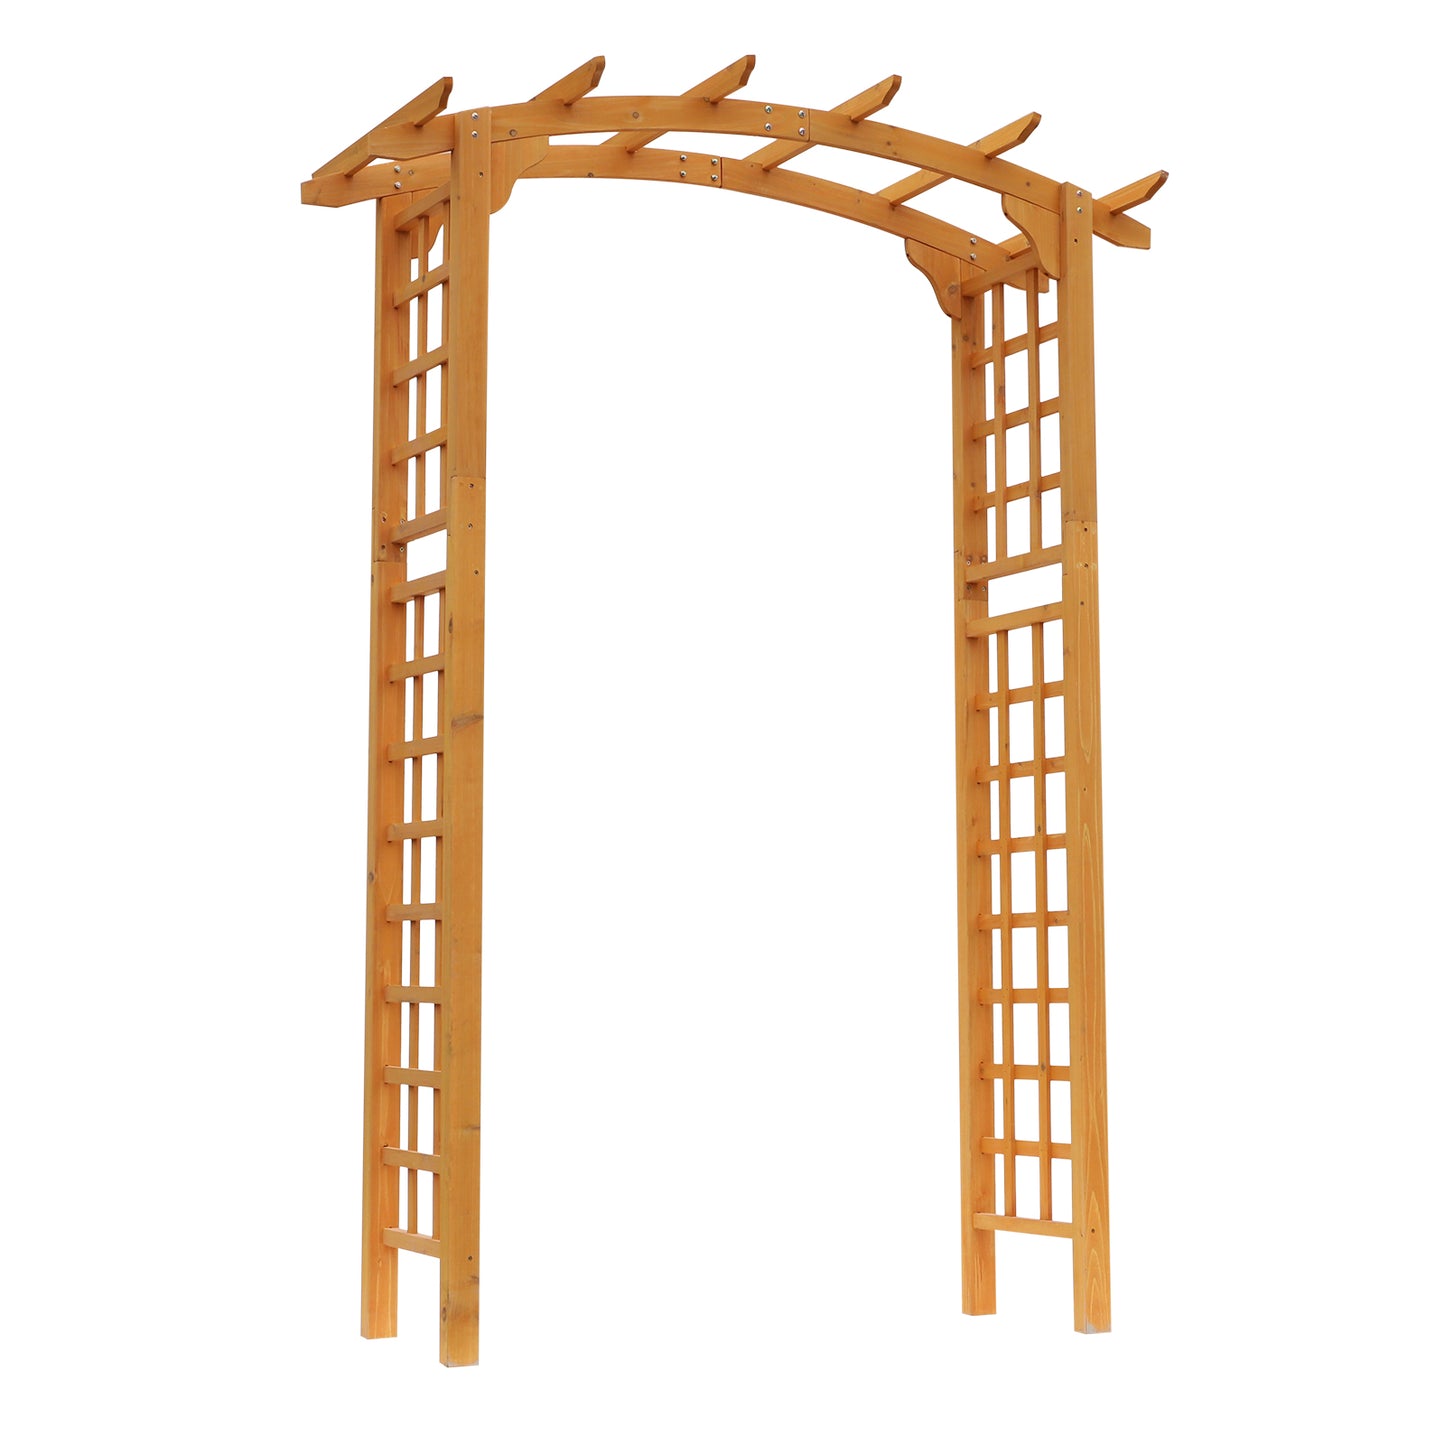 7.5FT Wood Garden Arch Trellis, Outdoor Walkway Round Pergola Style Arbor for Decorative Climbing Plants, Patio, Lawn, Backyard Party, Ceremony Decoration Accessories, Yellow - Gallery Canada